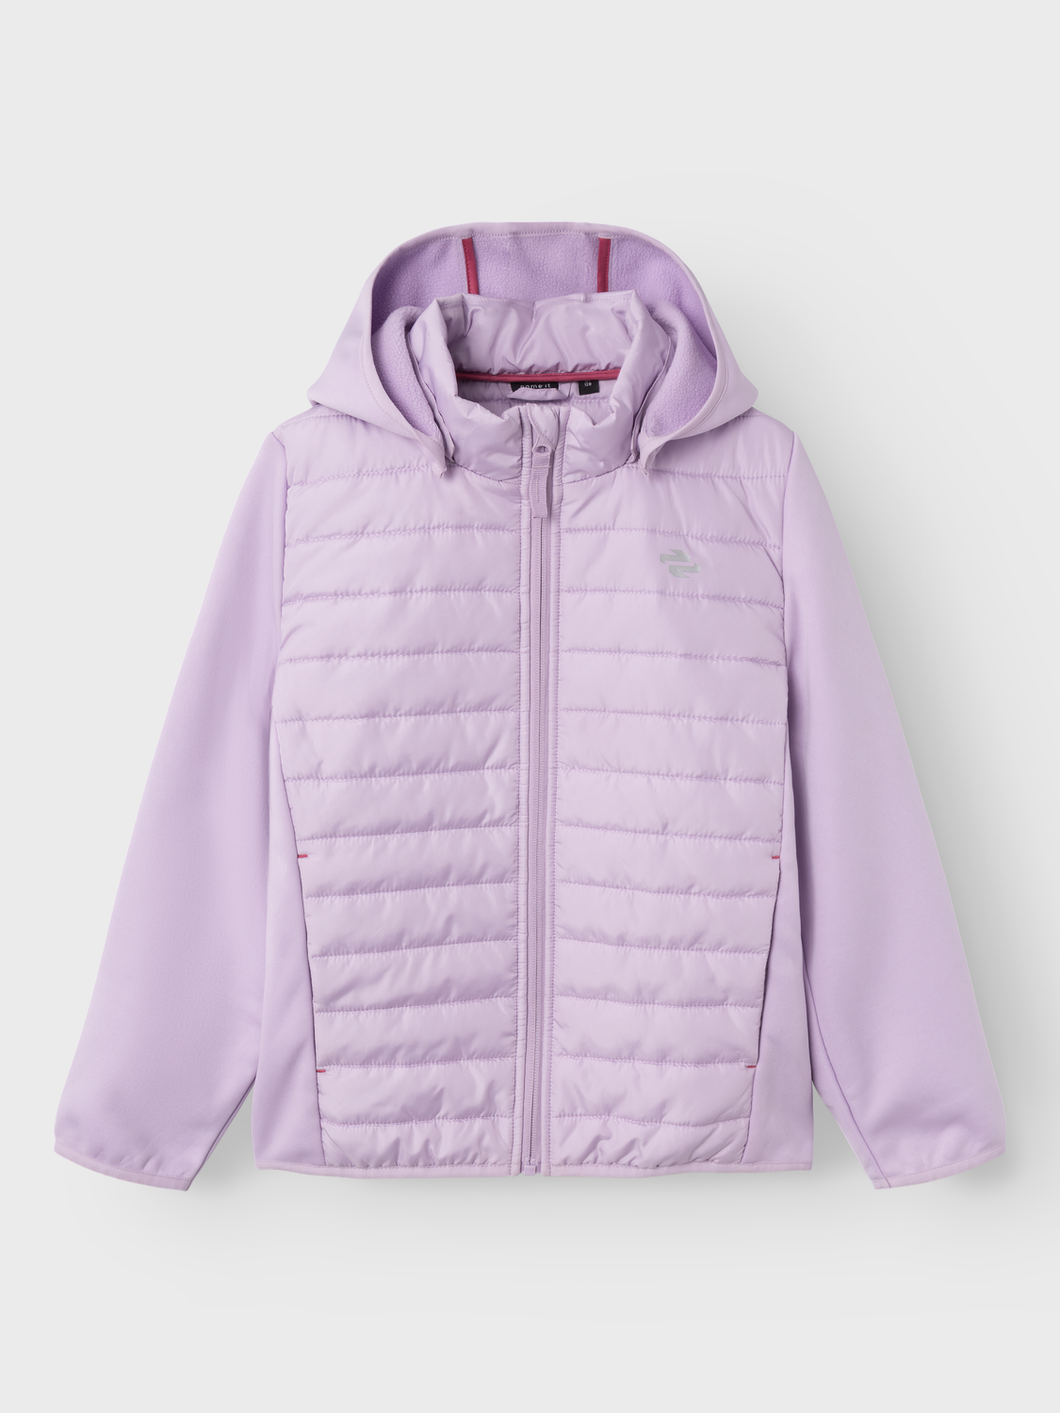 NKNMOUNT Outerwear - Orchid Bloom